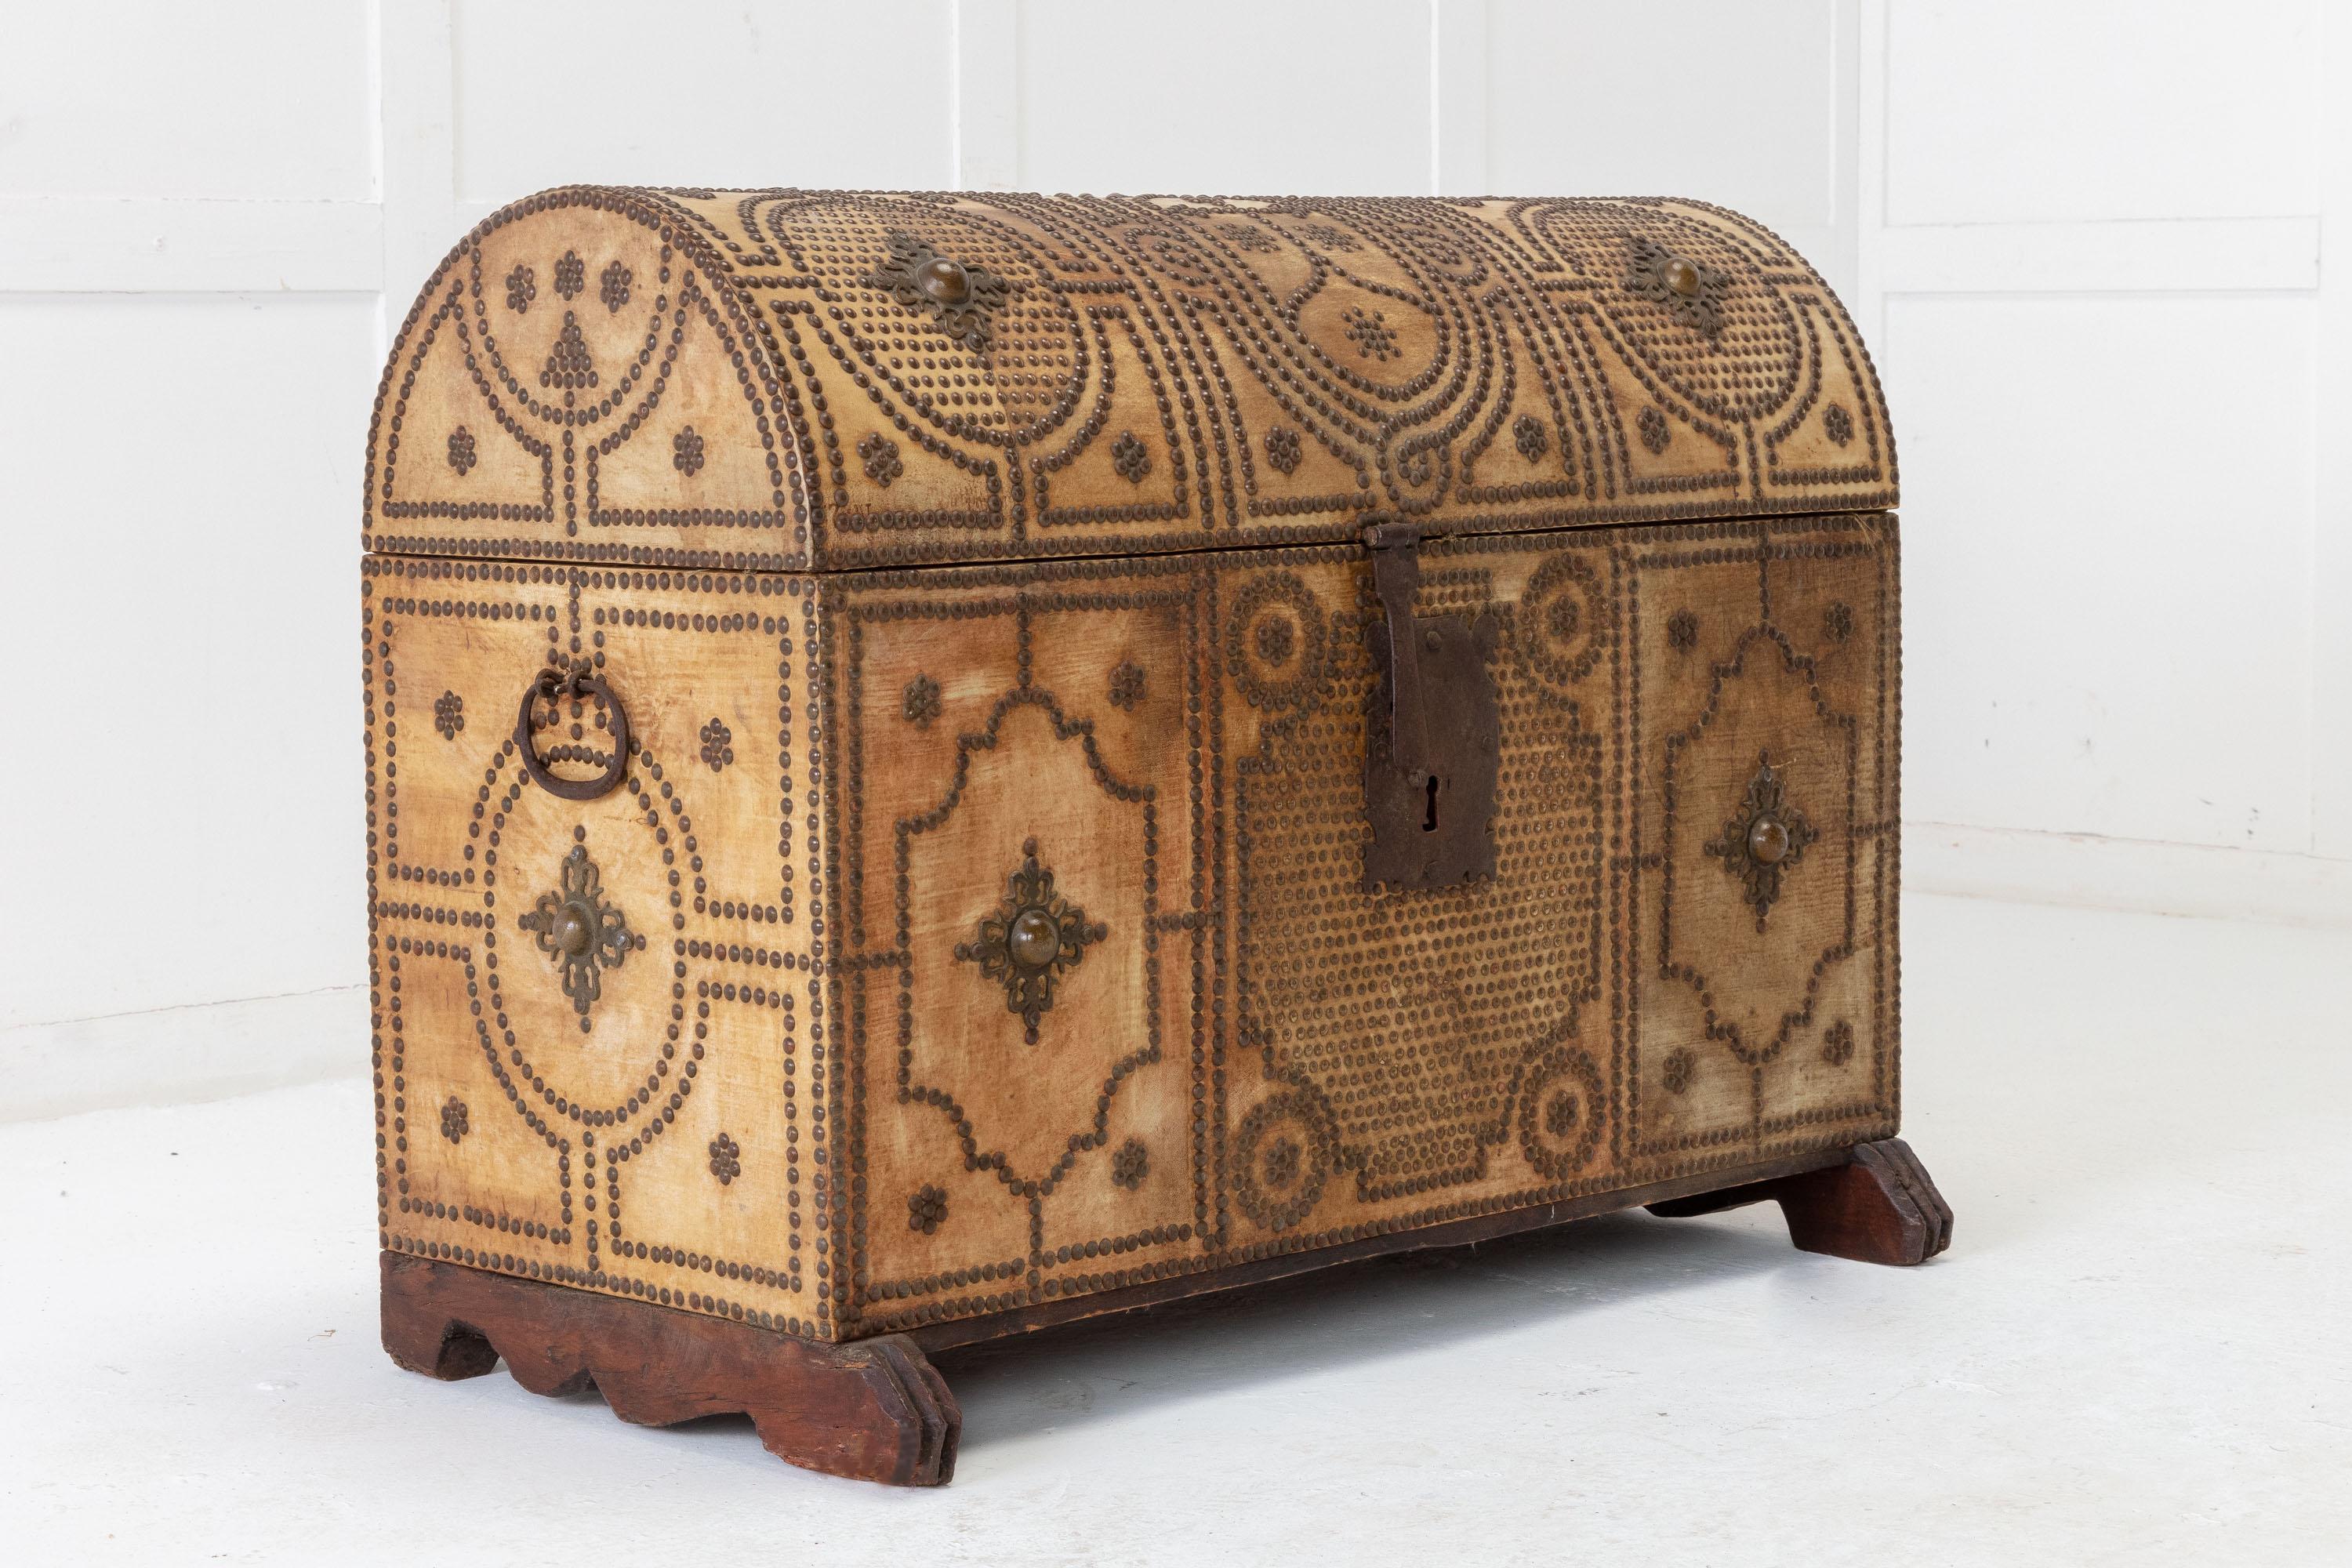 Decorative, Spanish travelling trunk with brass studded decoration. Having dome top lid and brass studded panels in geometric designs. The sides with original wrought iron carrying handles. The interior lined in old red linen and contrasting braid,